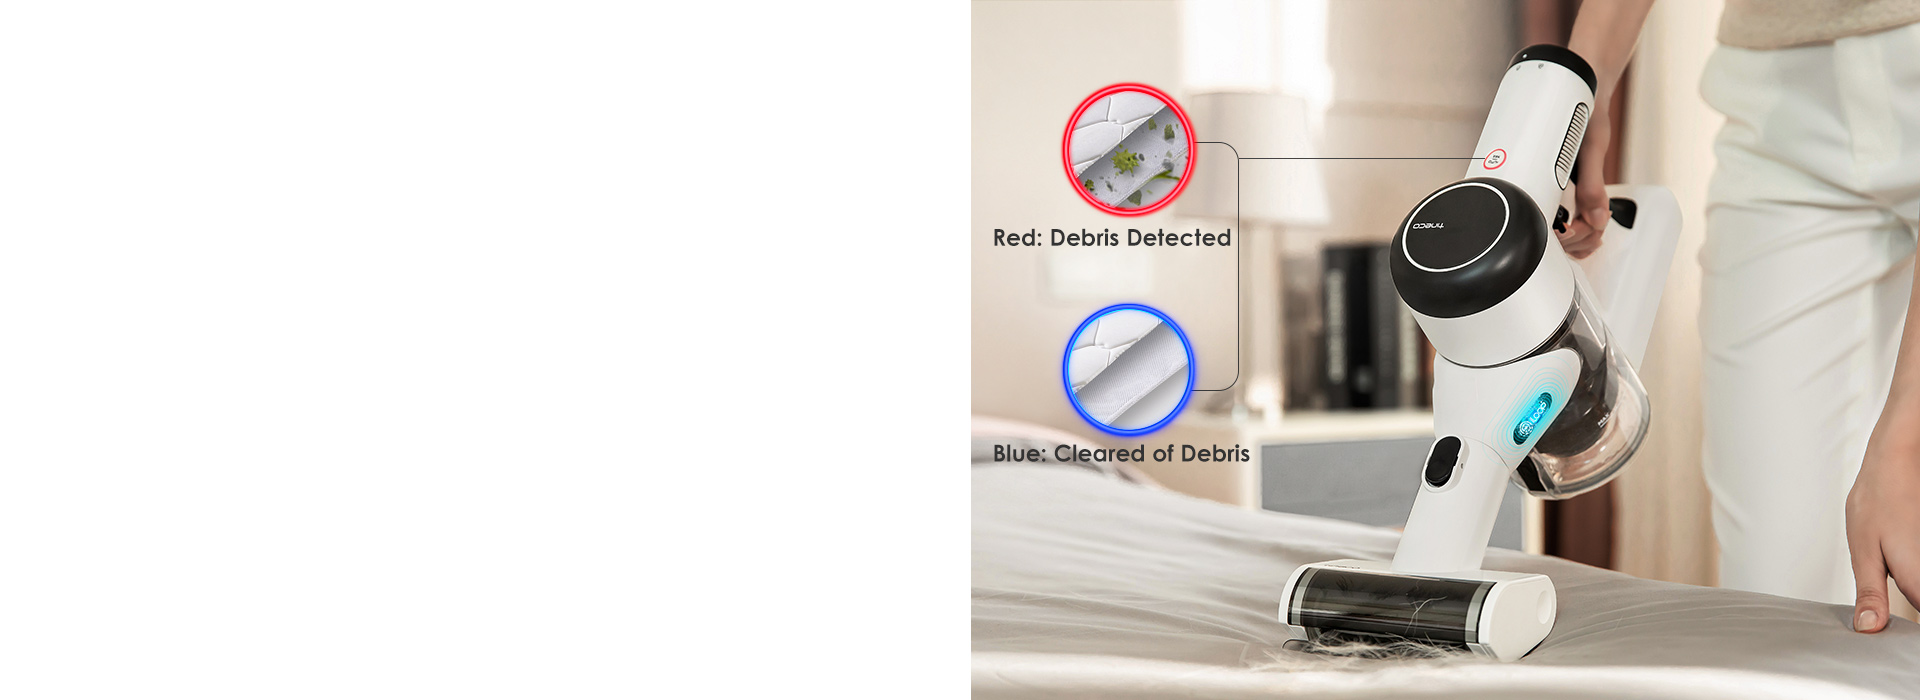 Red to Blue, Detection and Cleaning